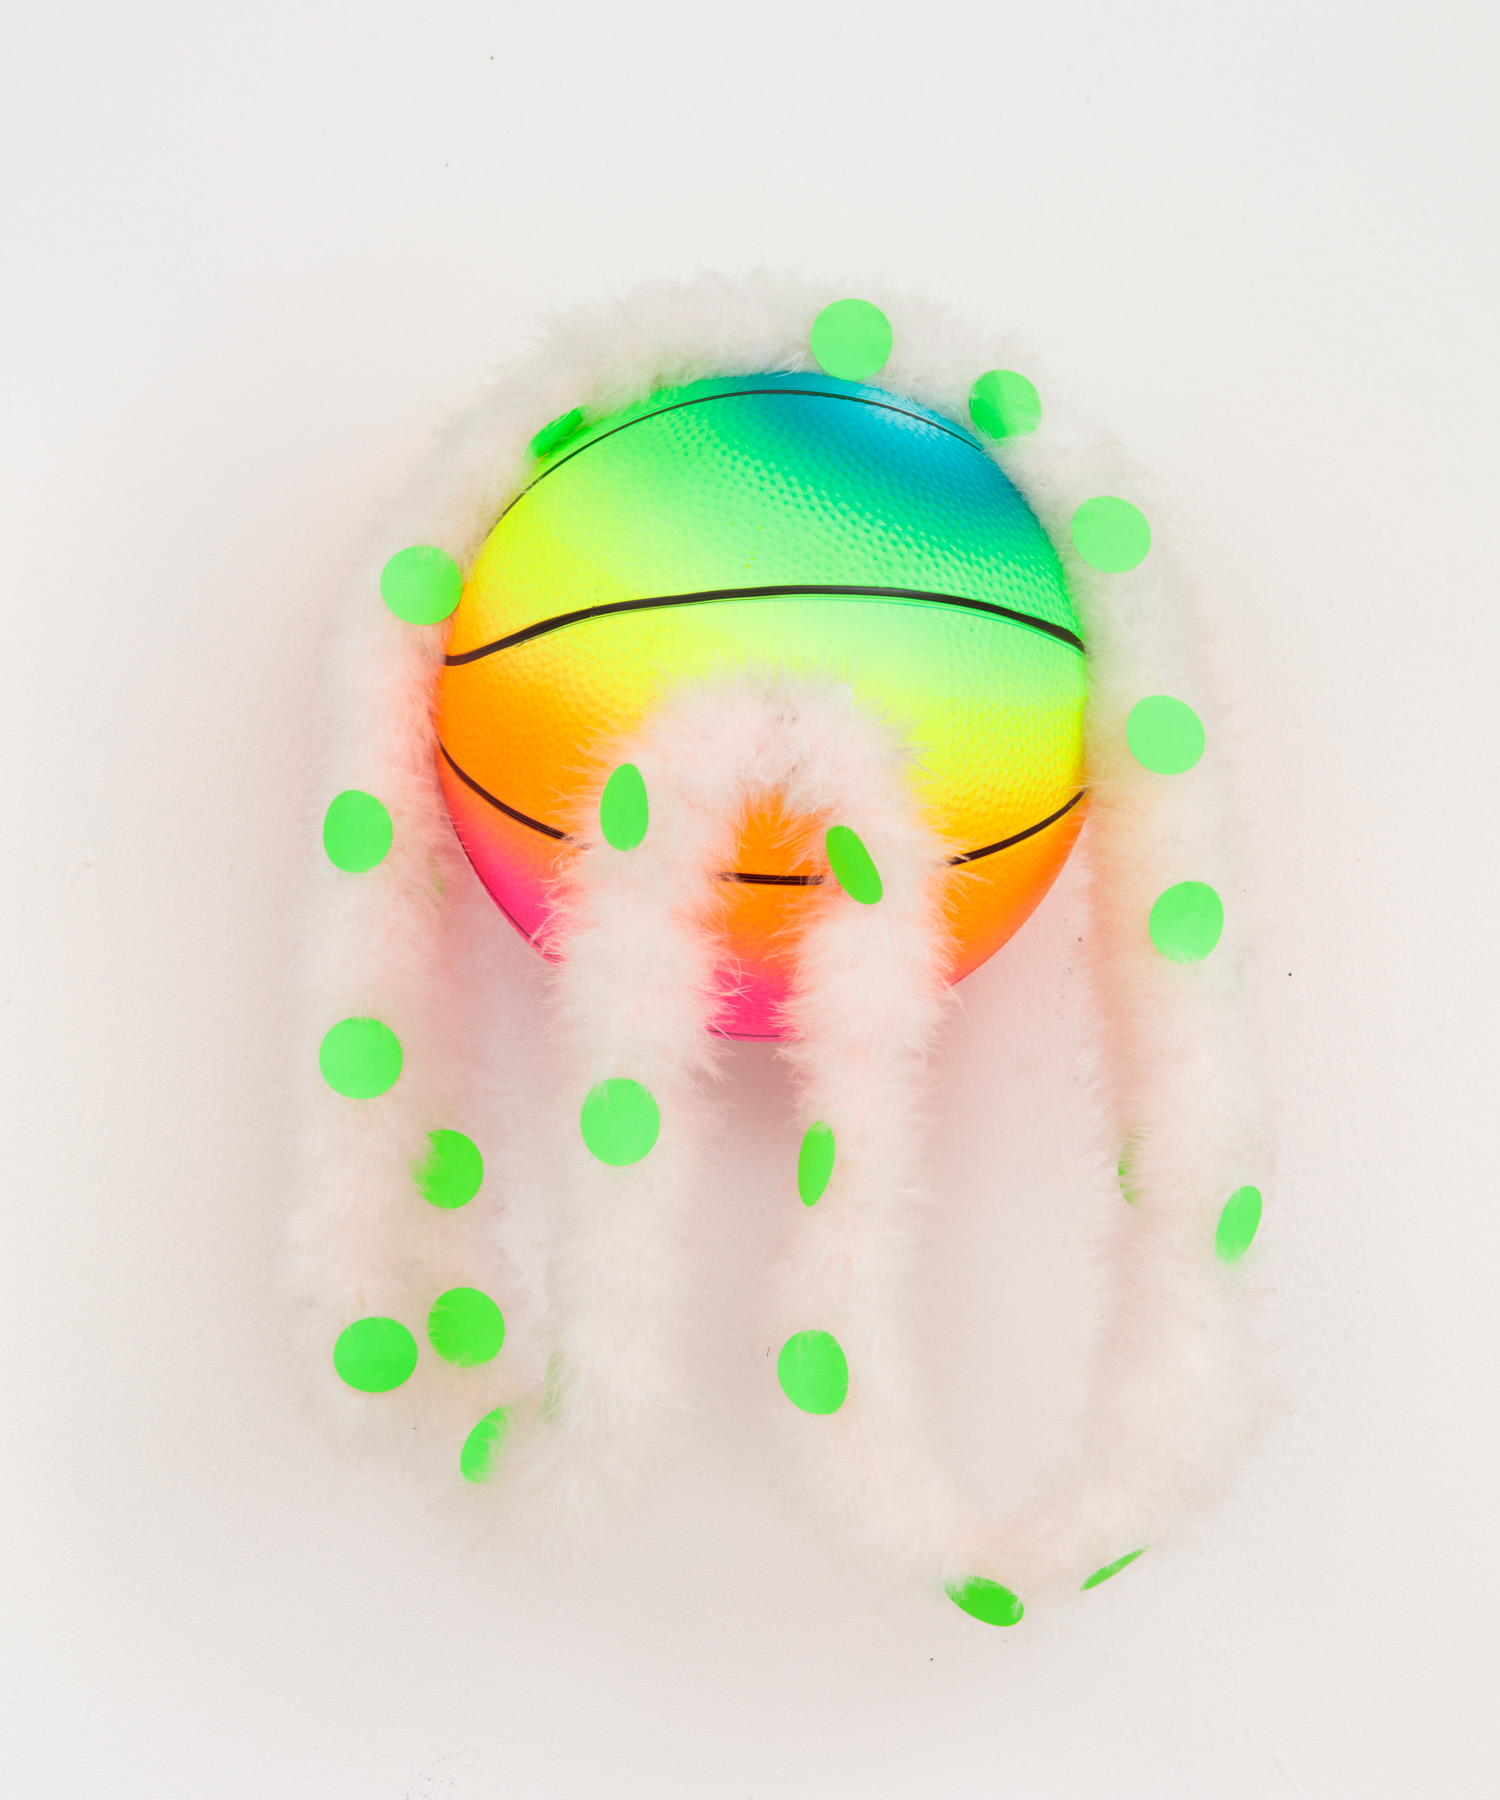 colorful basketball with a feather boa & dots